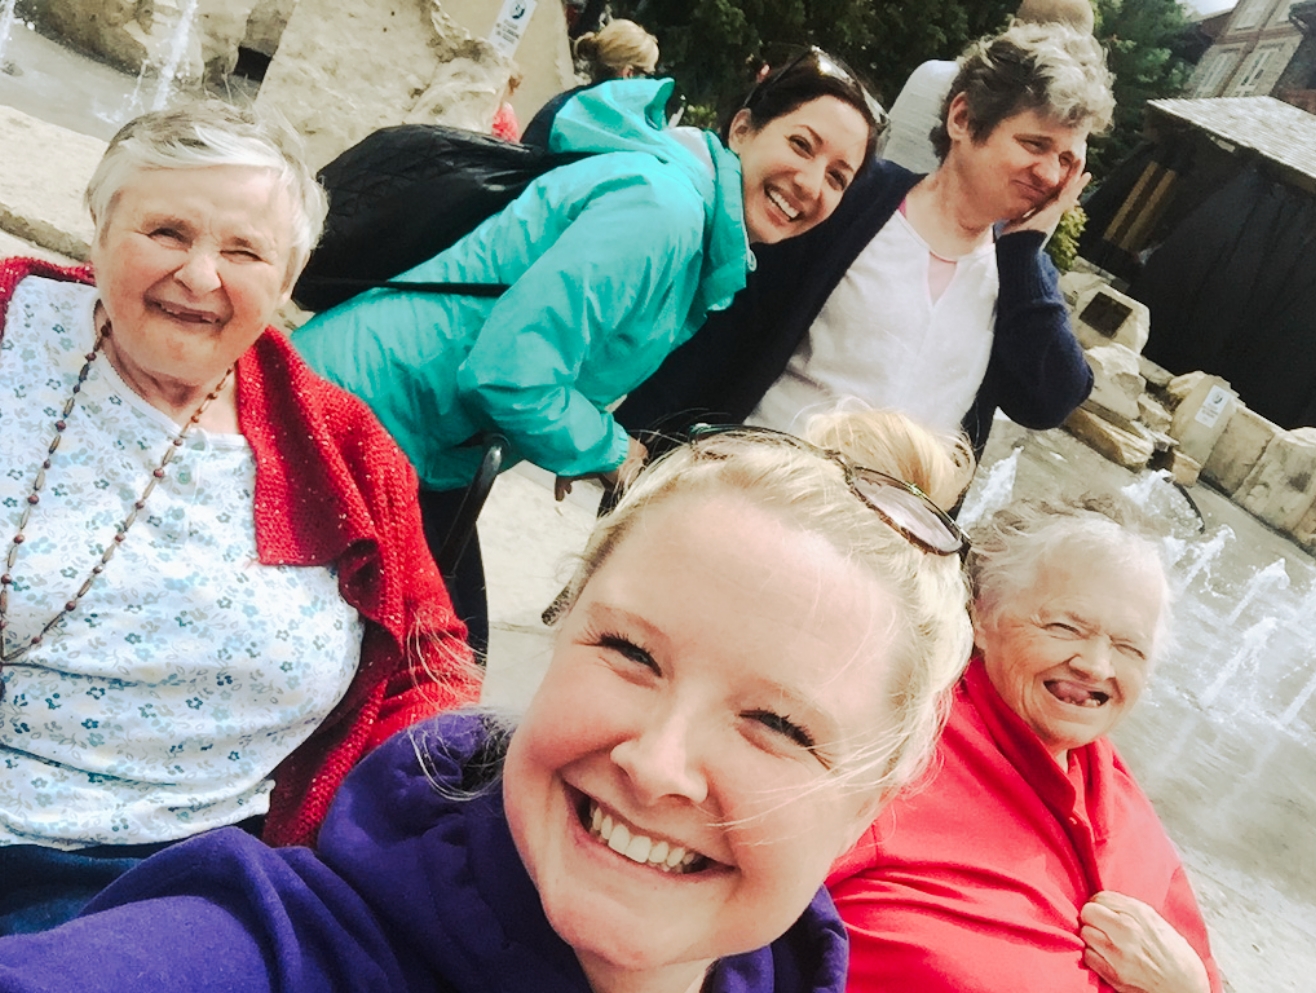 Five woman of varying ages laughing and smiling while taking a selfie with water fountains in the background.